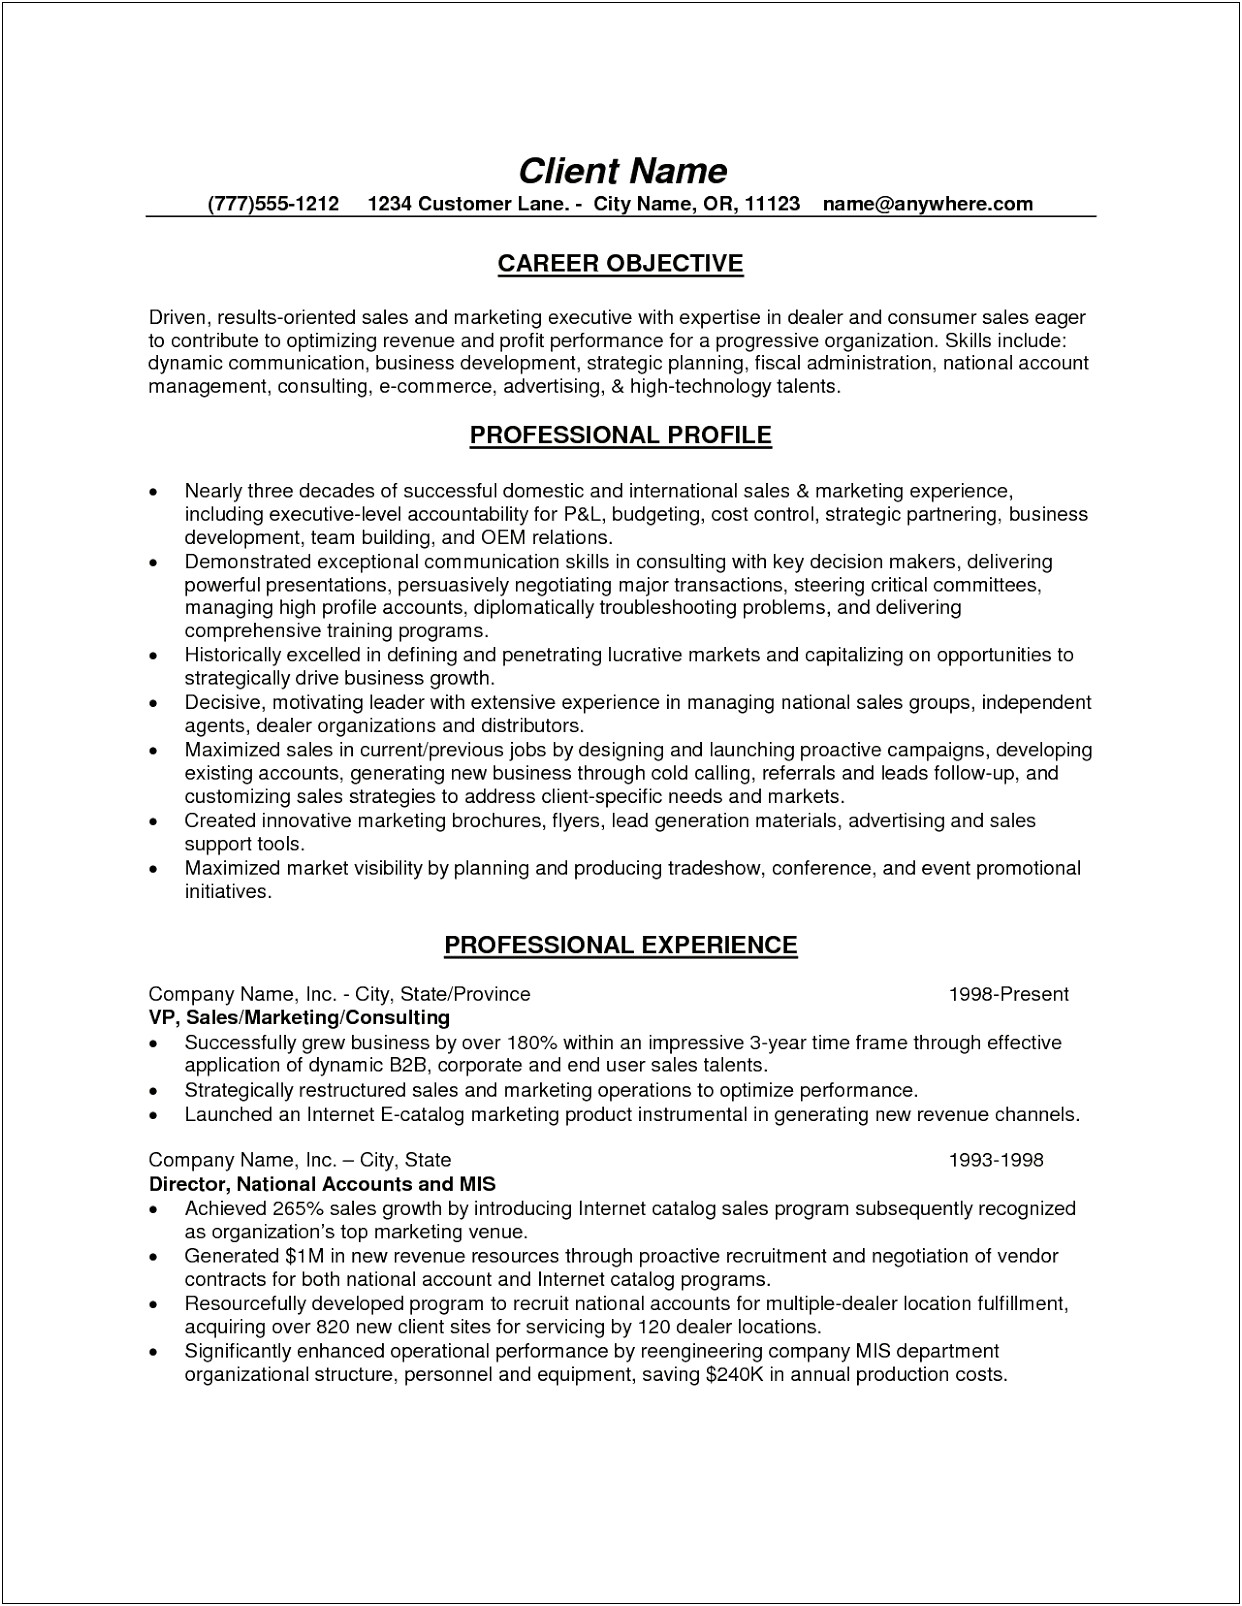 Resume Objectives Examples For Any Job